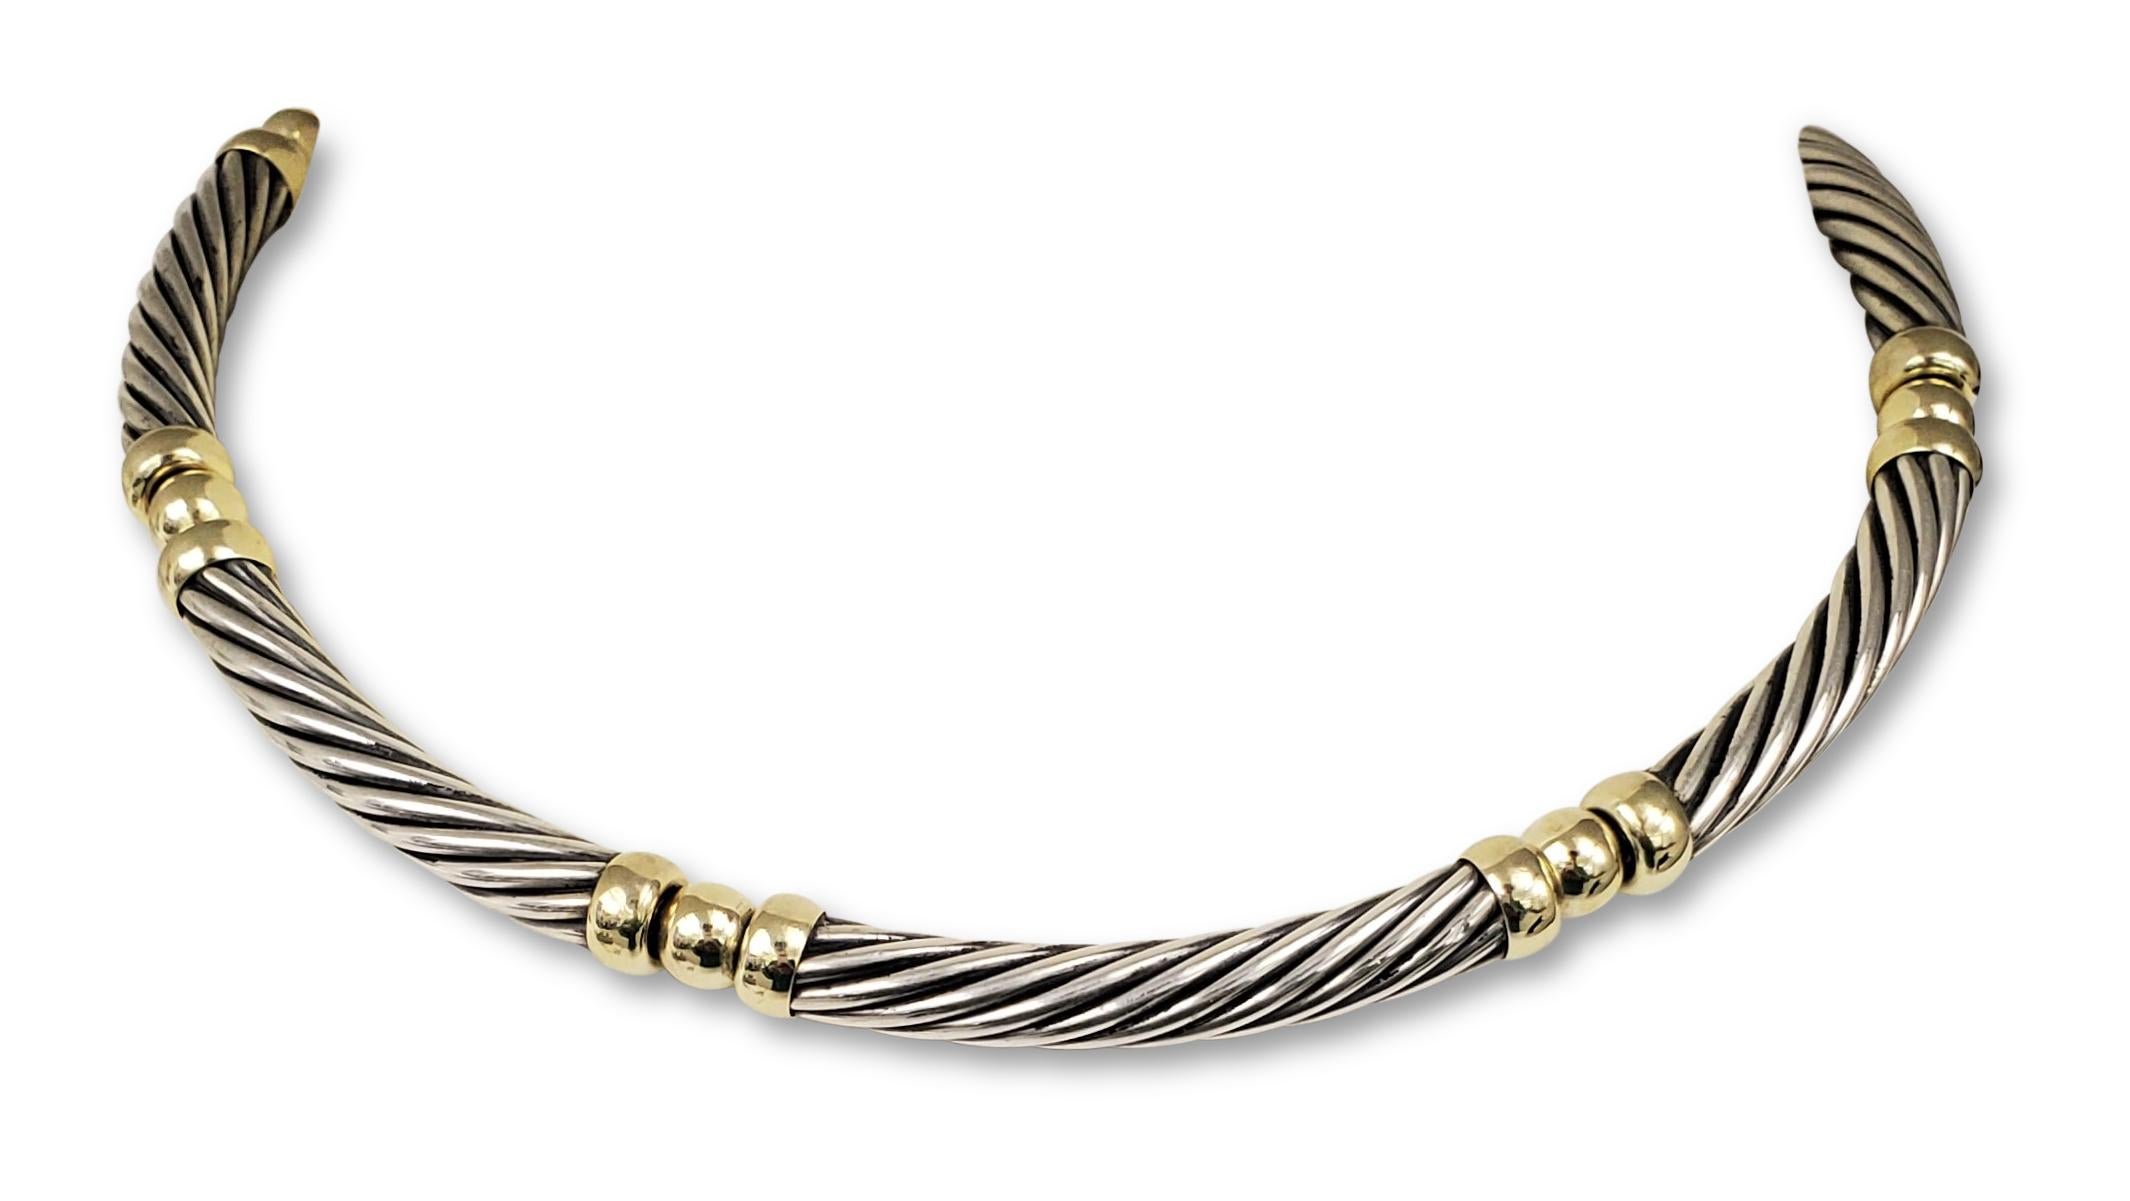 Authentic David Yurman 6mm cable necklace crafted in Sterling Silver and 14 karat yellow gold.  Features Yurman's classic cable design in 7 links.  5 1/2 inch diameter.  Signed DY, 925, 585.  CIRCA 1990s